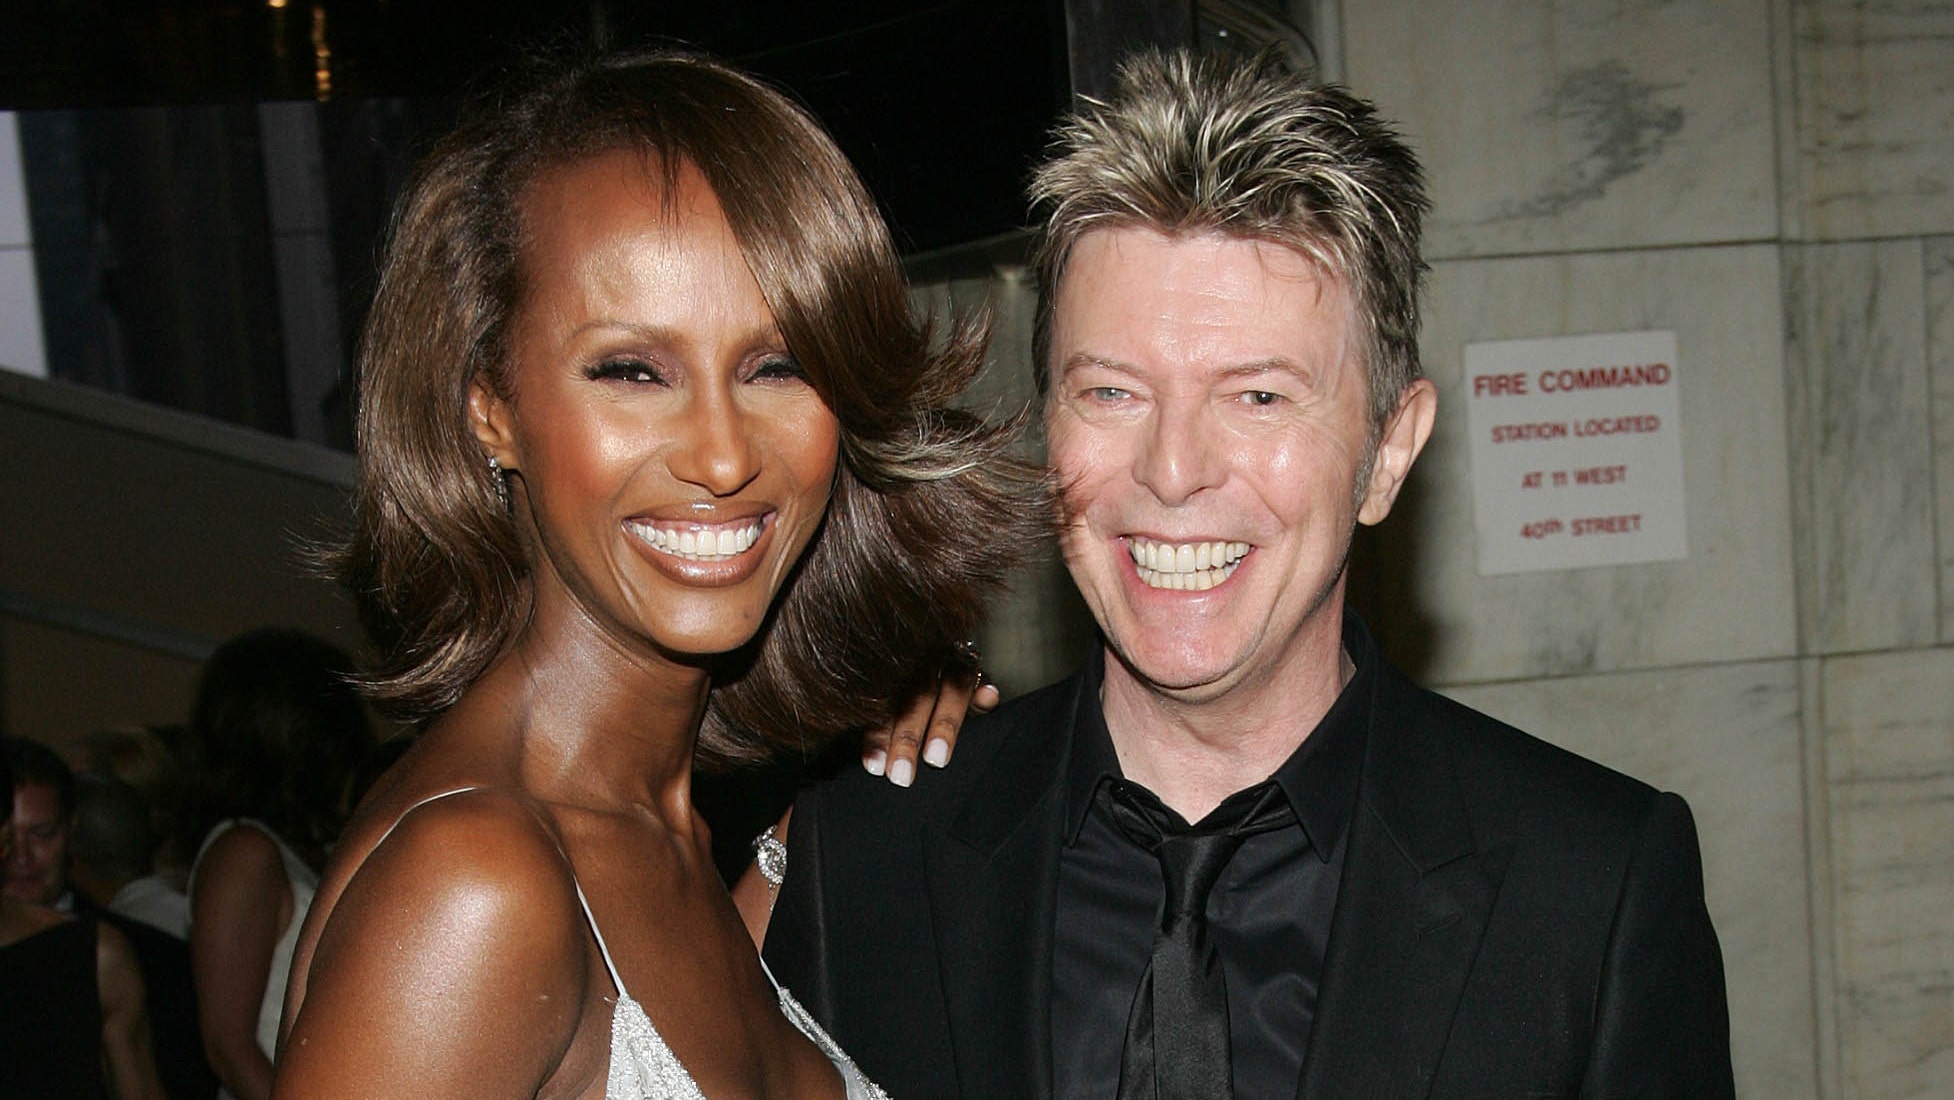 David Bowie, Iman’s daughter Lexi Jones, throws Instagram troll: ‘Dim witted piece of trash’